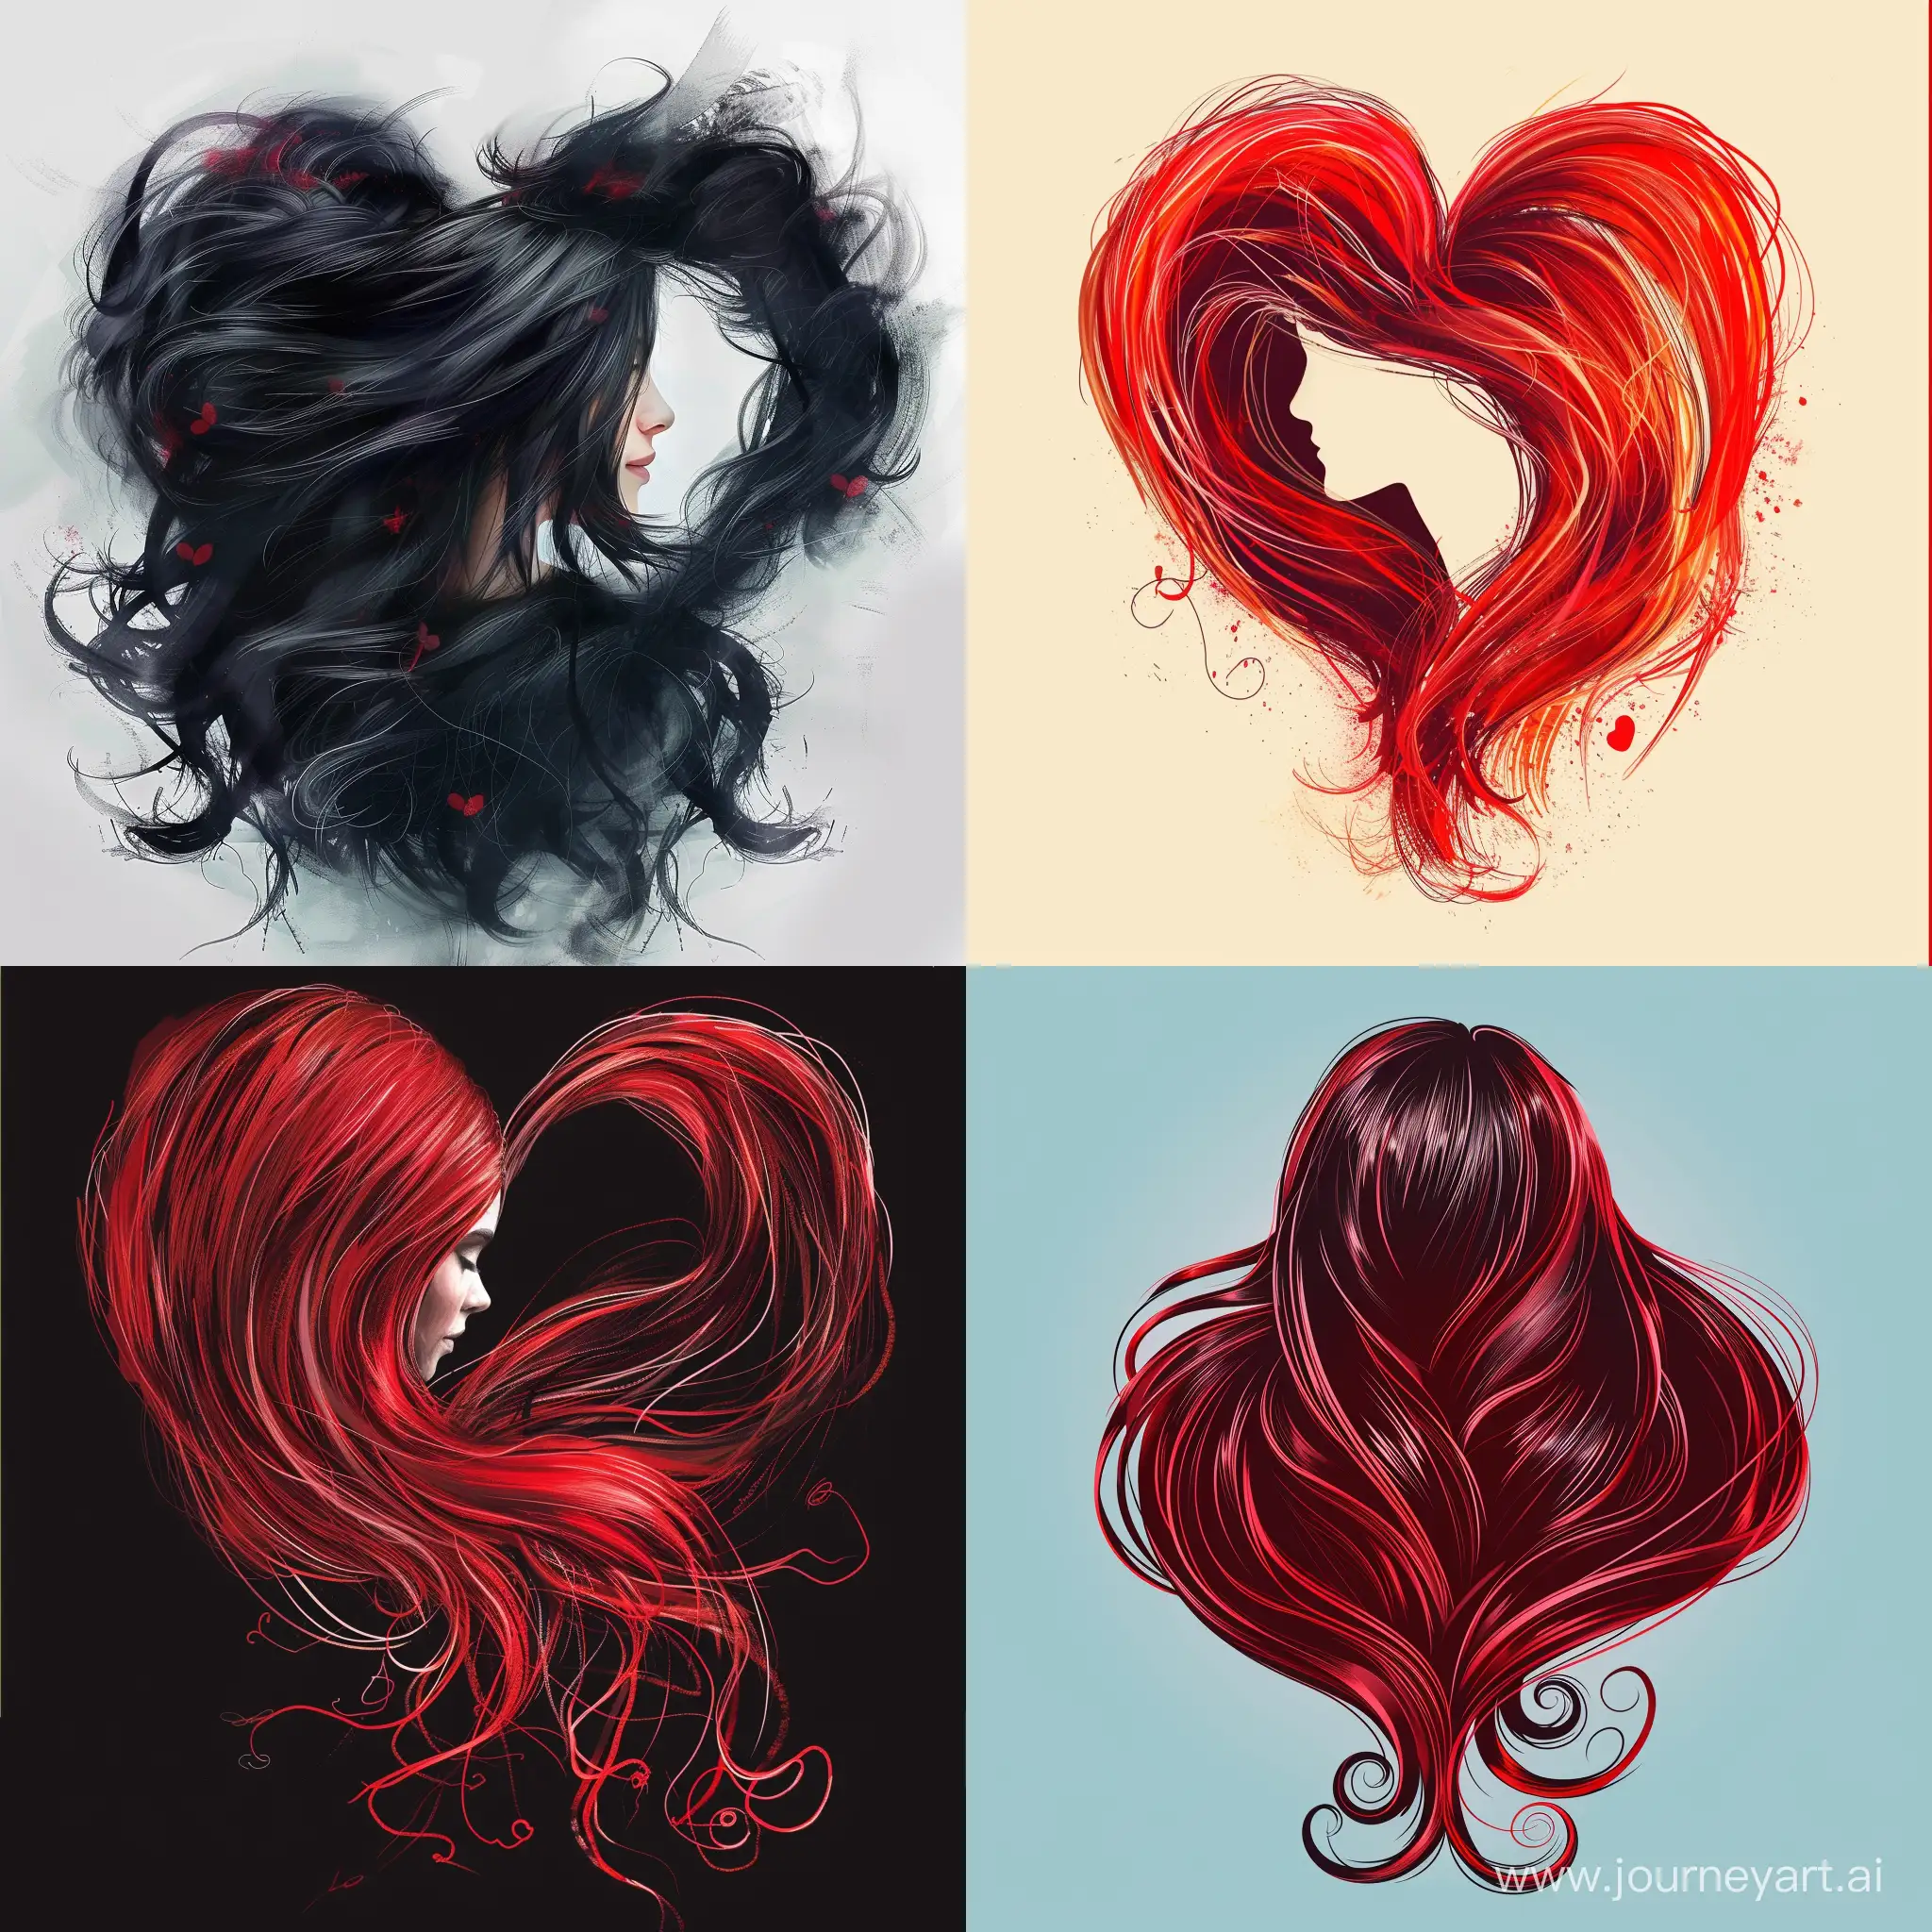 Generate an artistic depiction of 'hair in heart shape' suitable for Valentine's Day